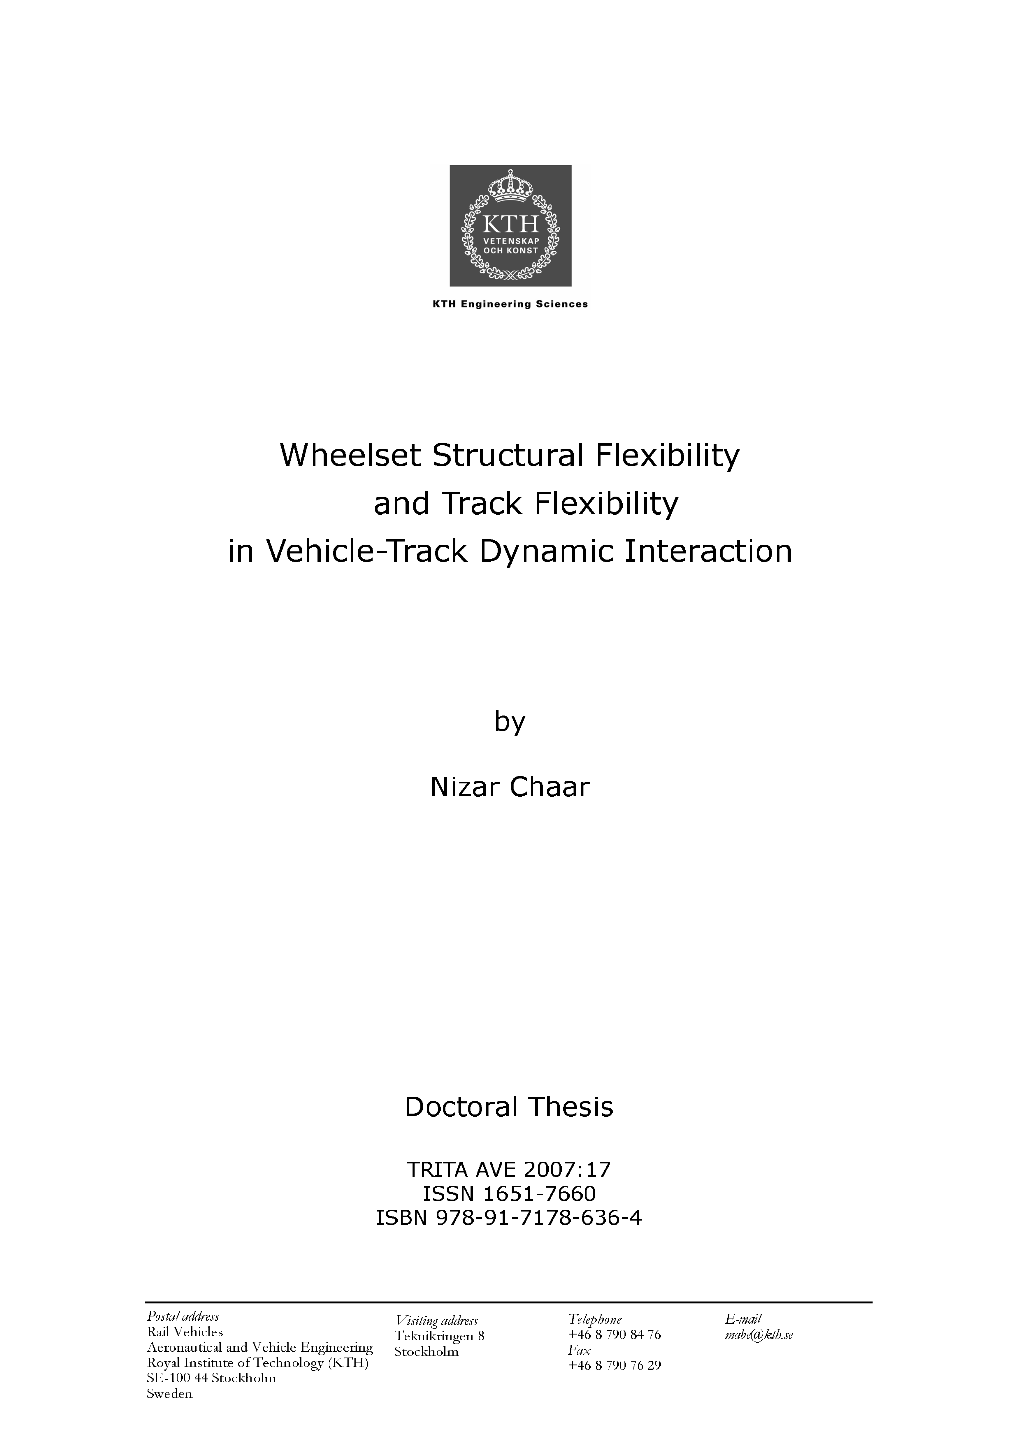 Wheelset Structural Flexibility and Track Flexibility in Vehicle-Track Dynamic Interaction